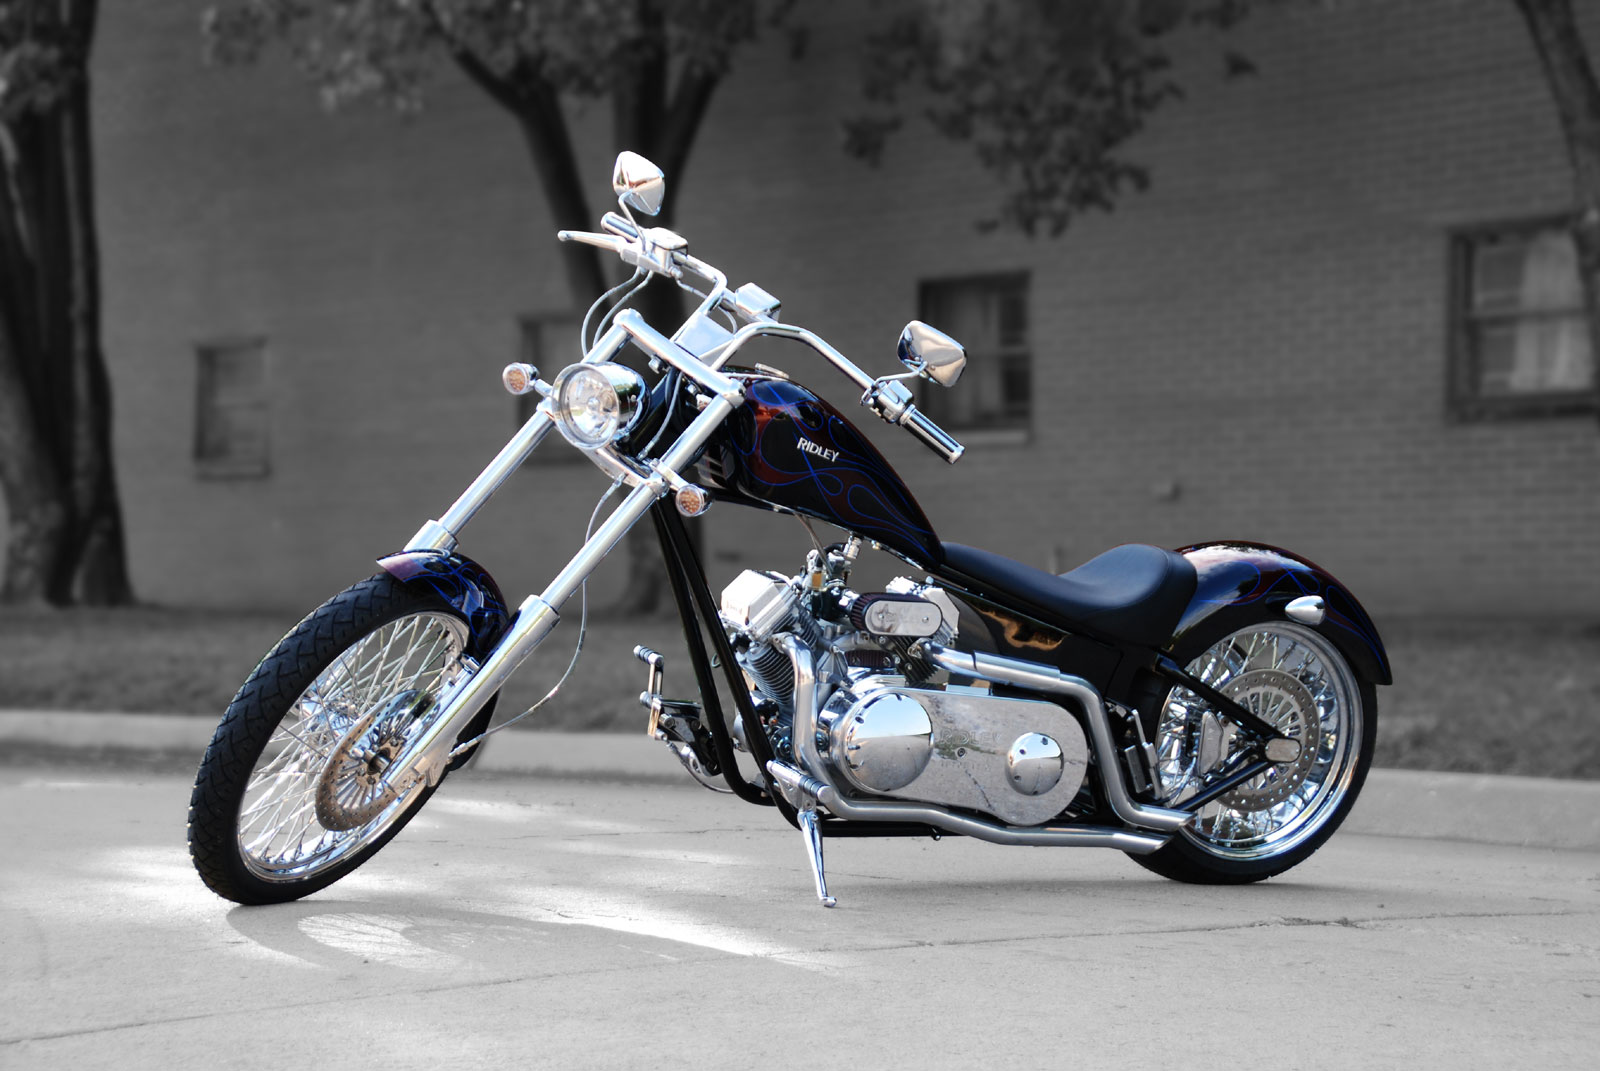 Convenience and Power means Ridley Auto-Glide Chopper #1